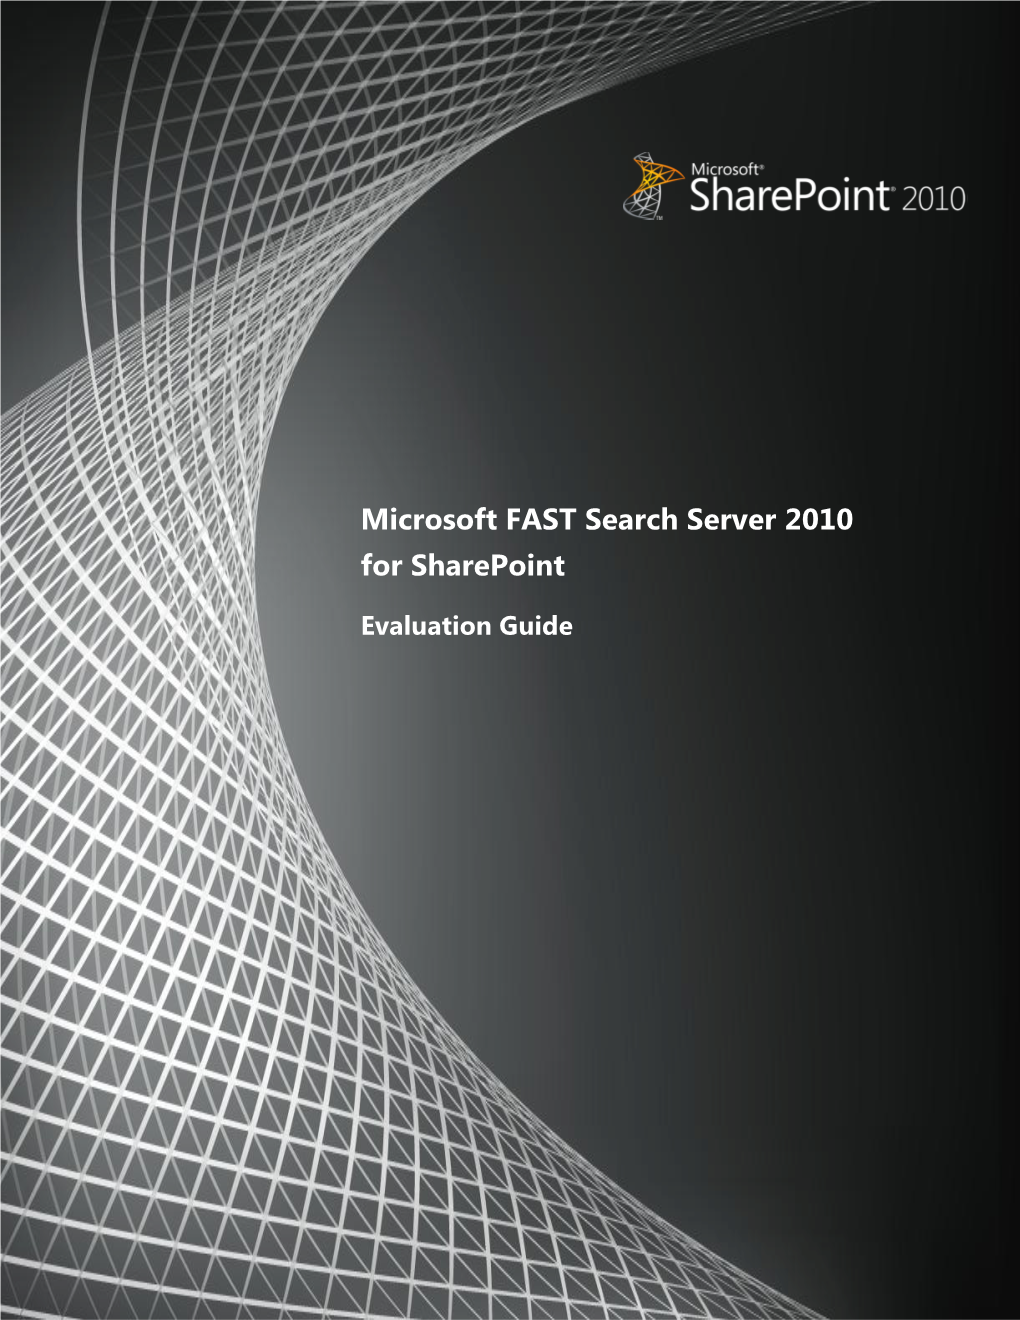 Microsoft FAST Search Server 2010 for Sharepoint